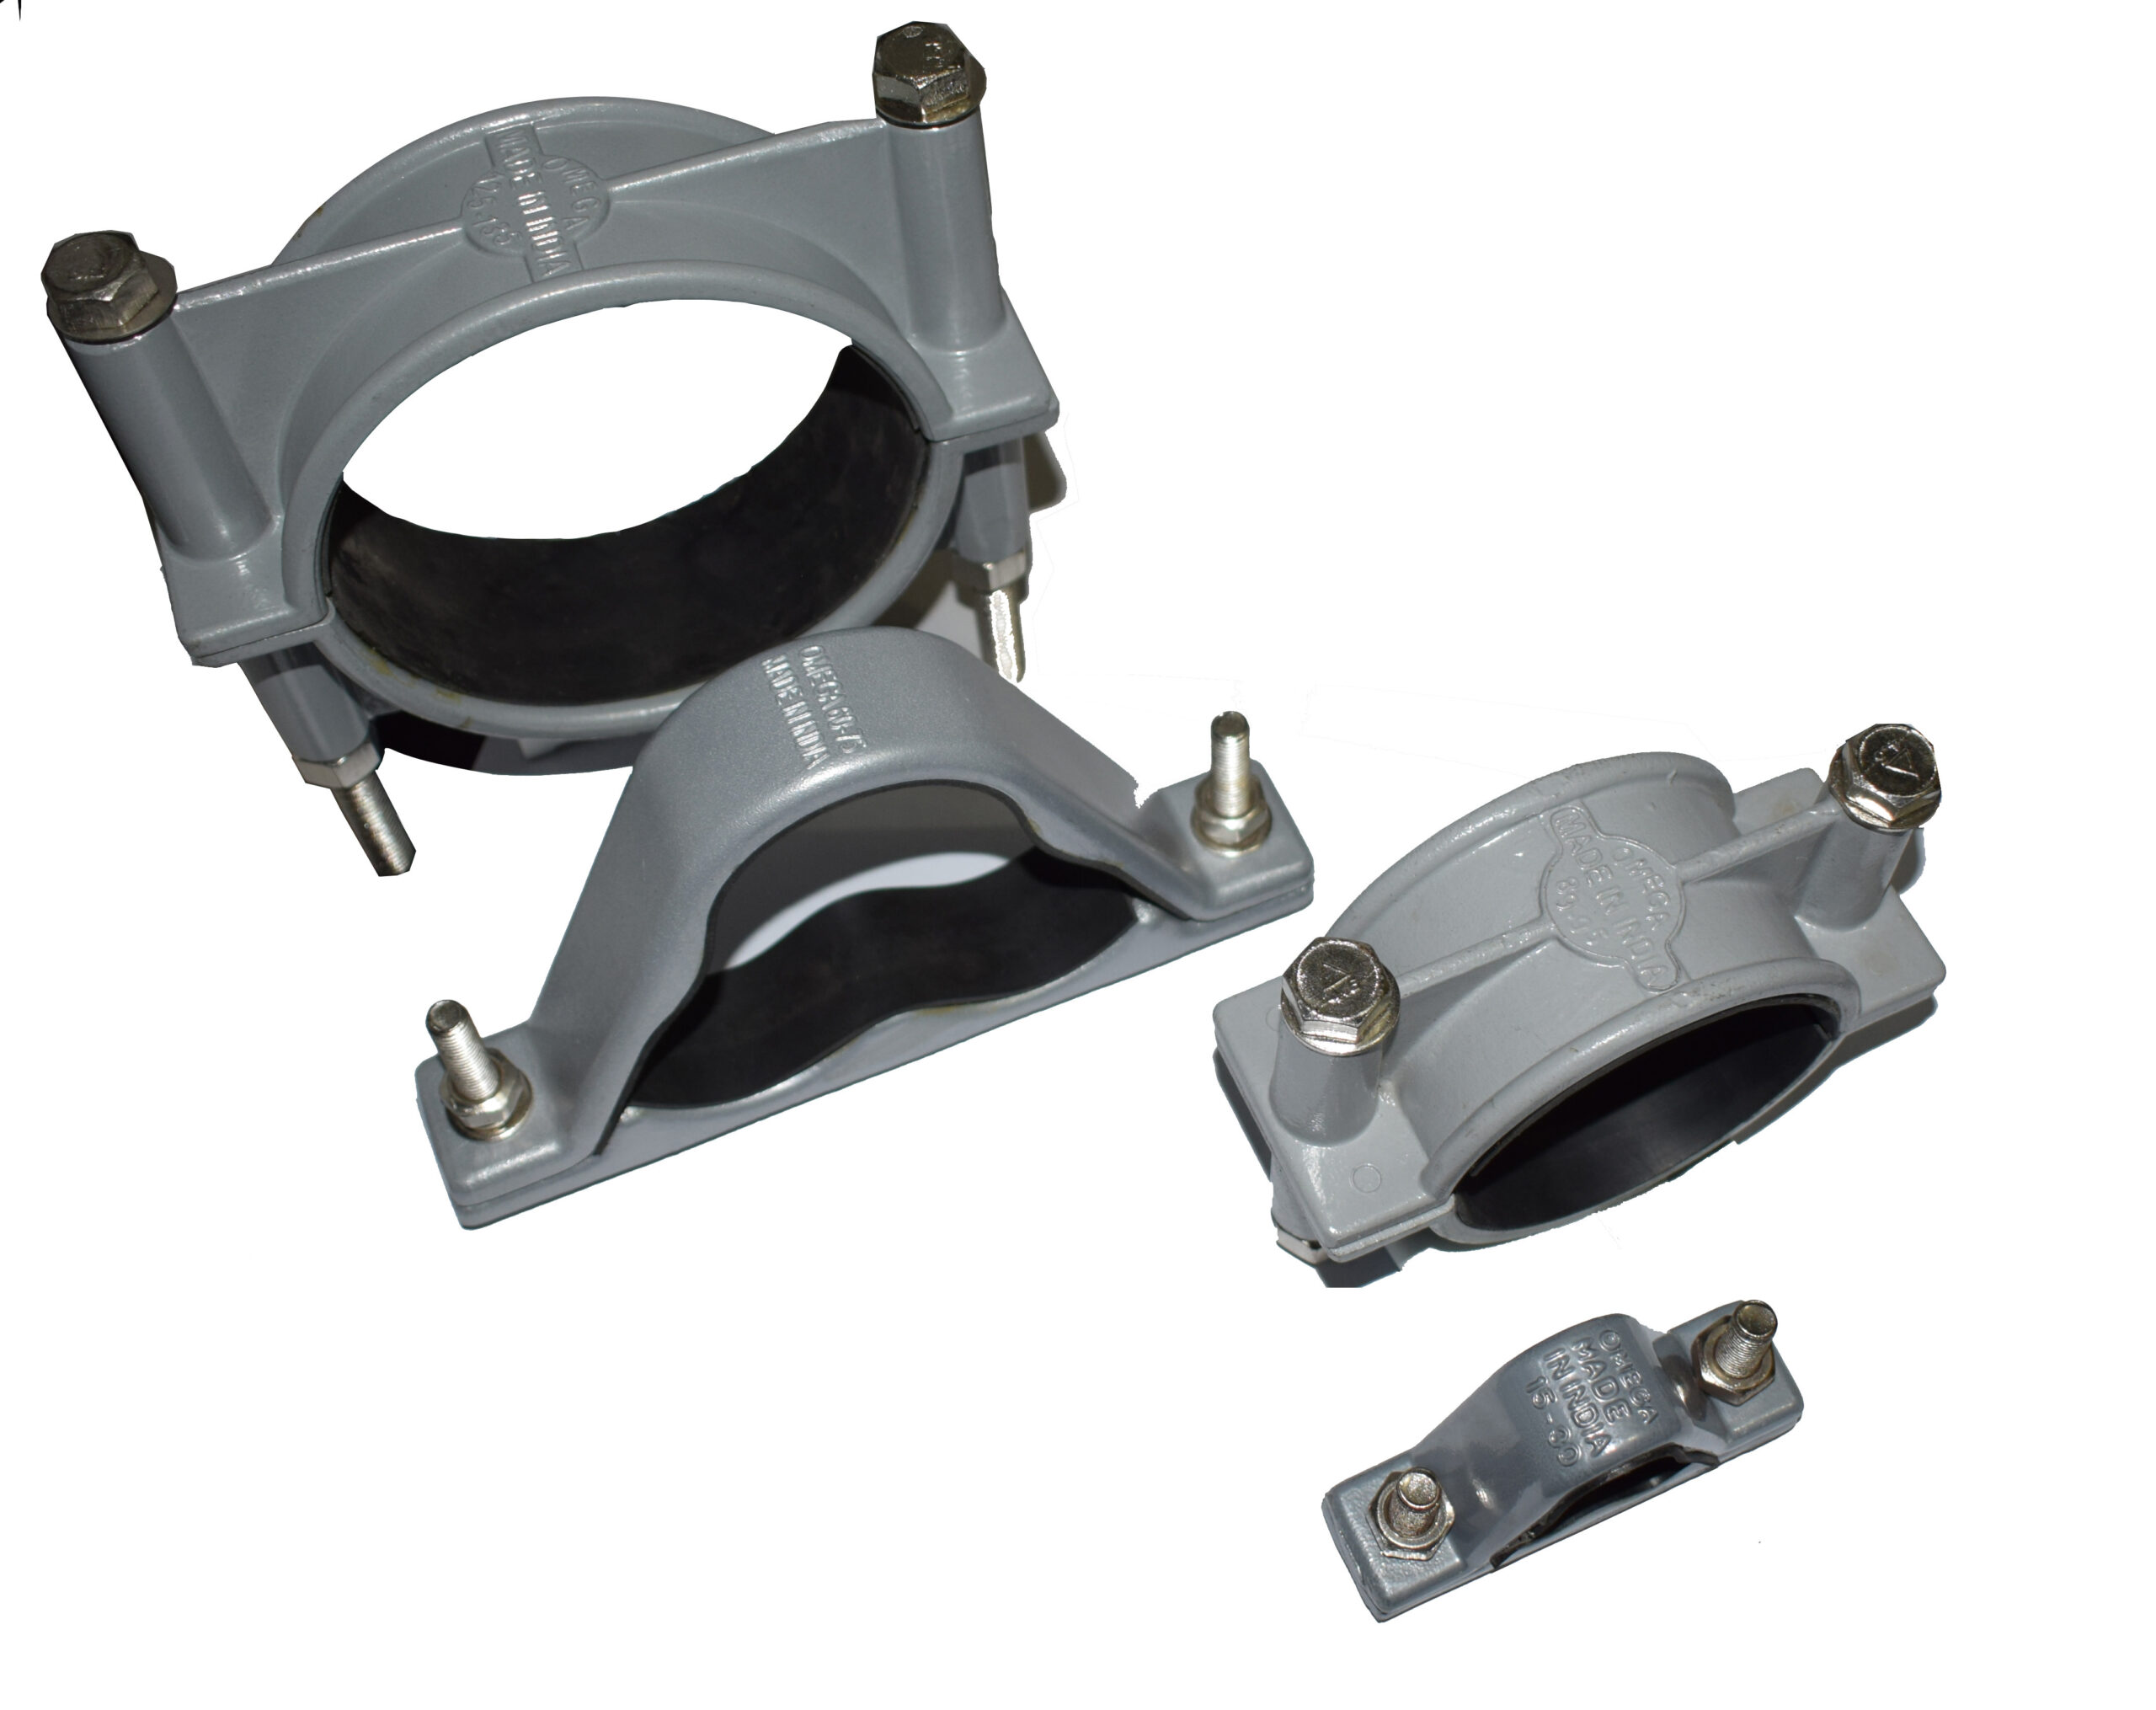 Various sizes of OMEGA cable cleats and clamps, designed for securing electrical cables in different configurations.